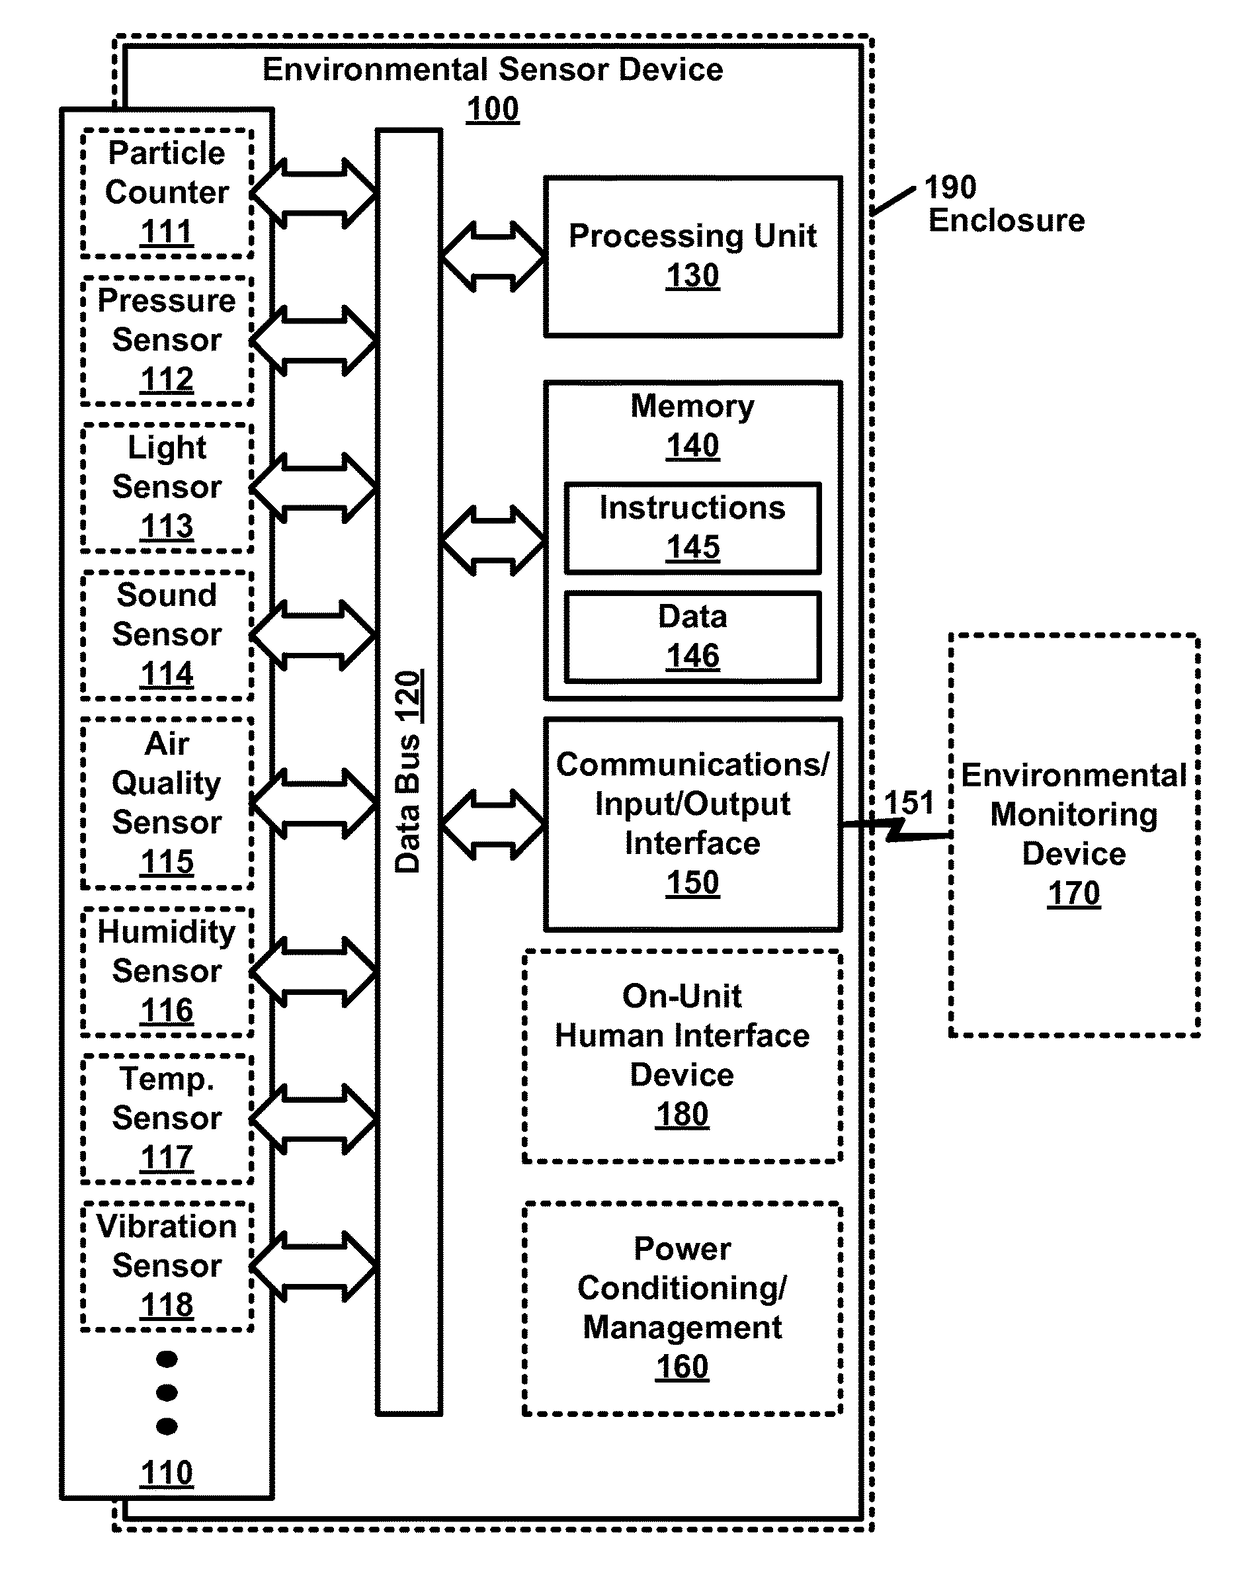 Environmental monitor device with database